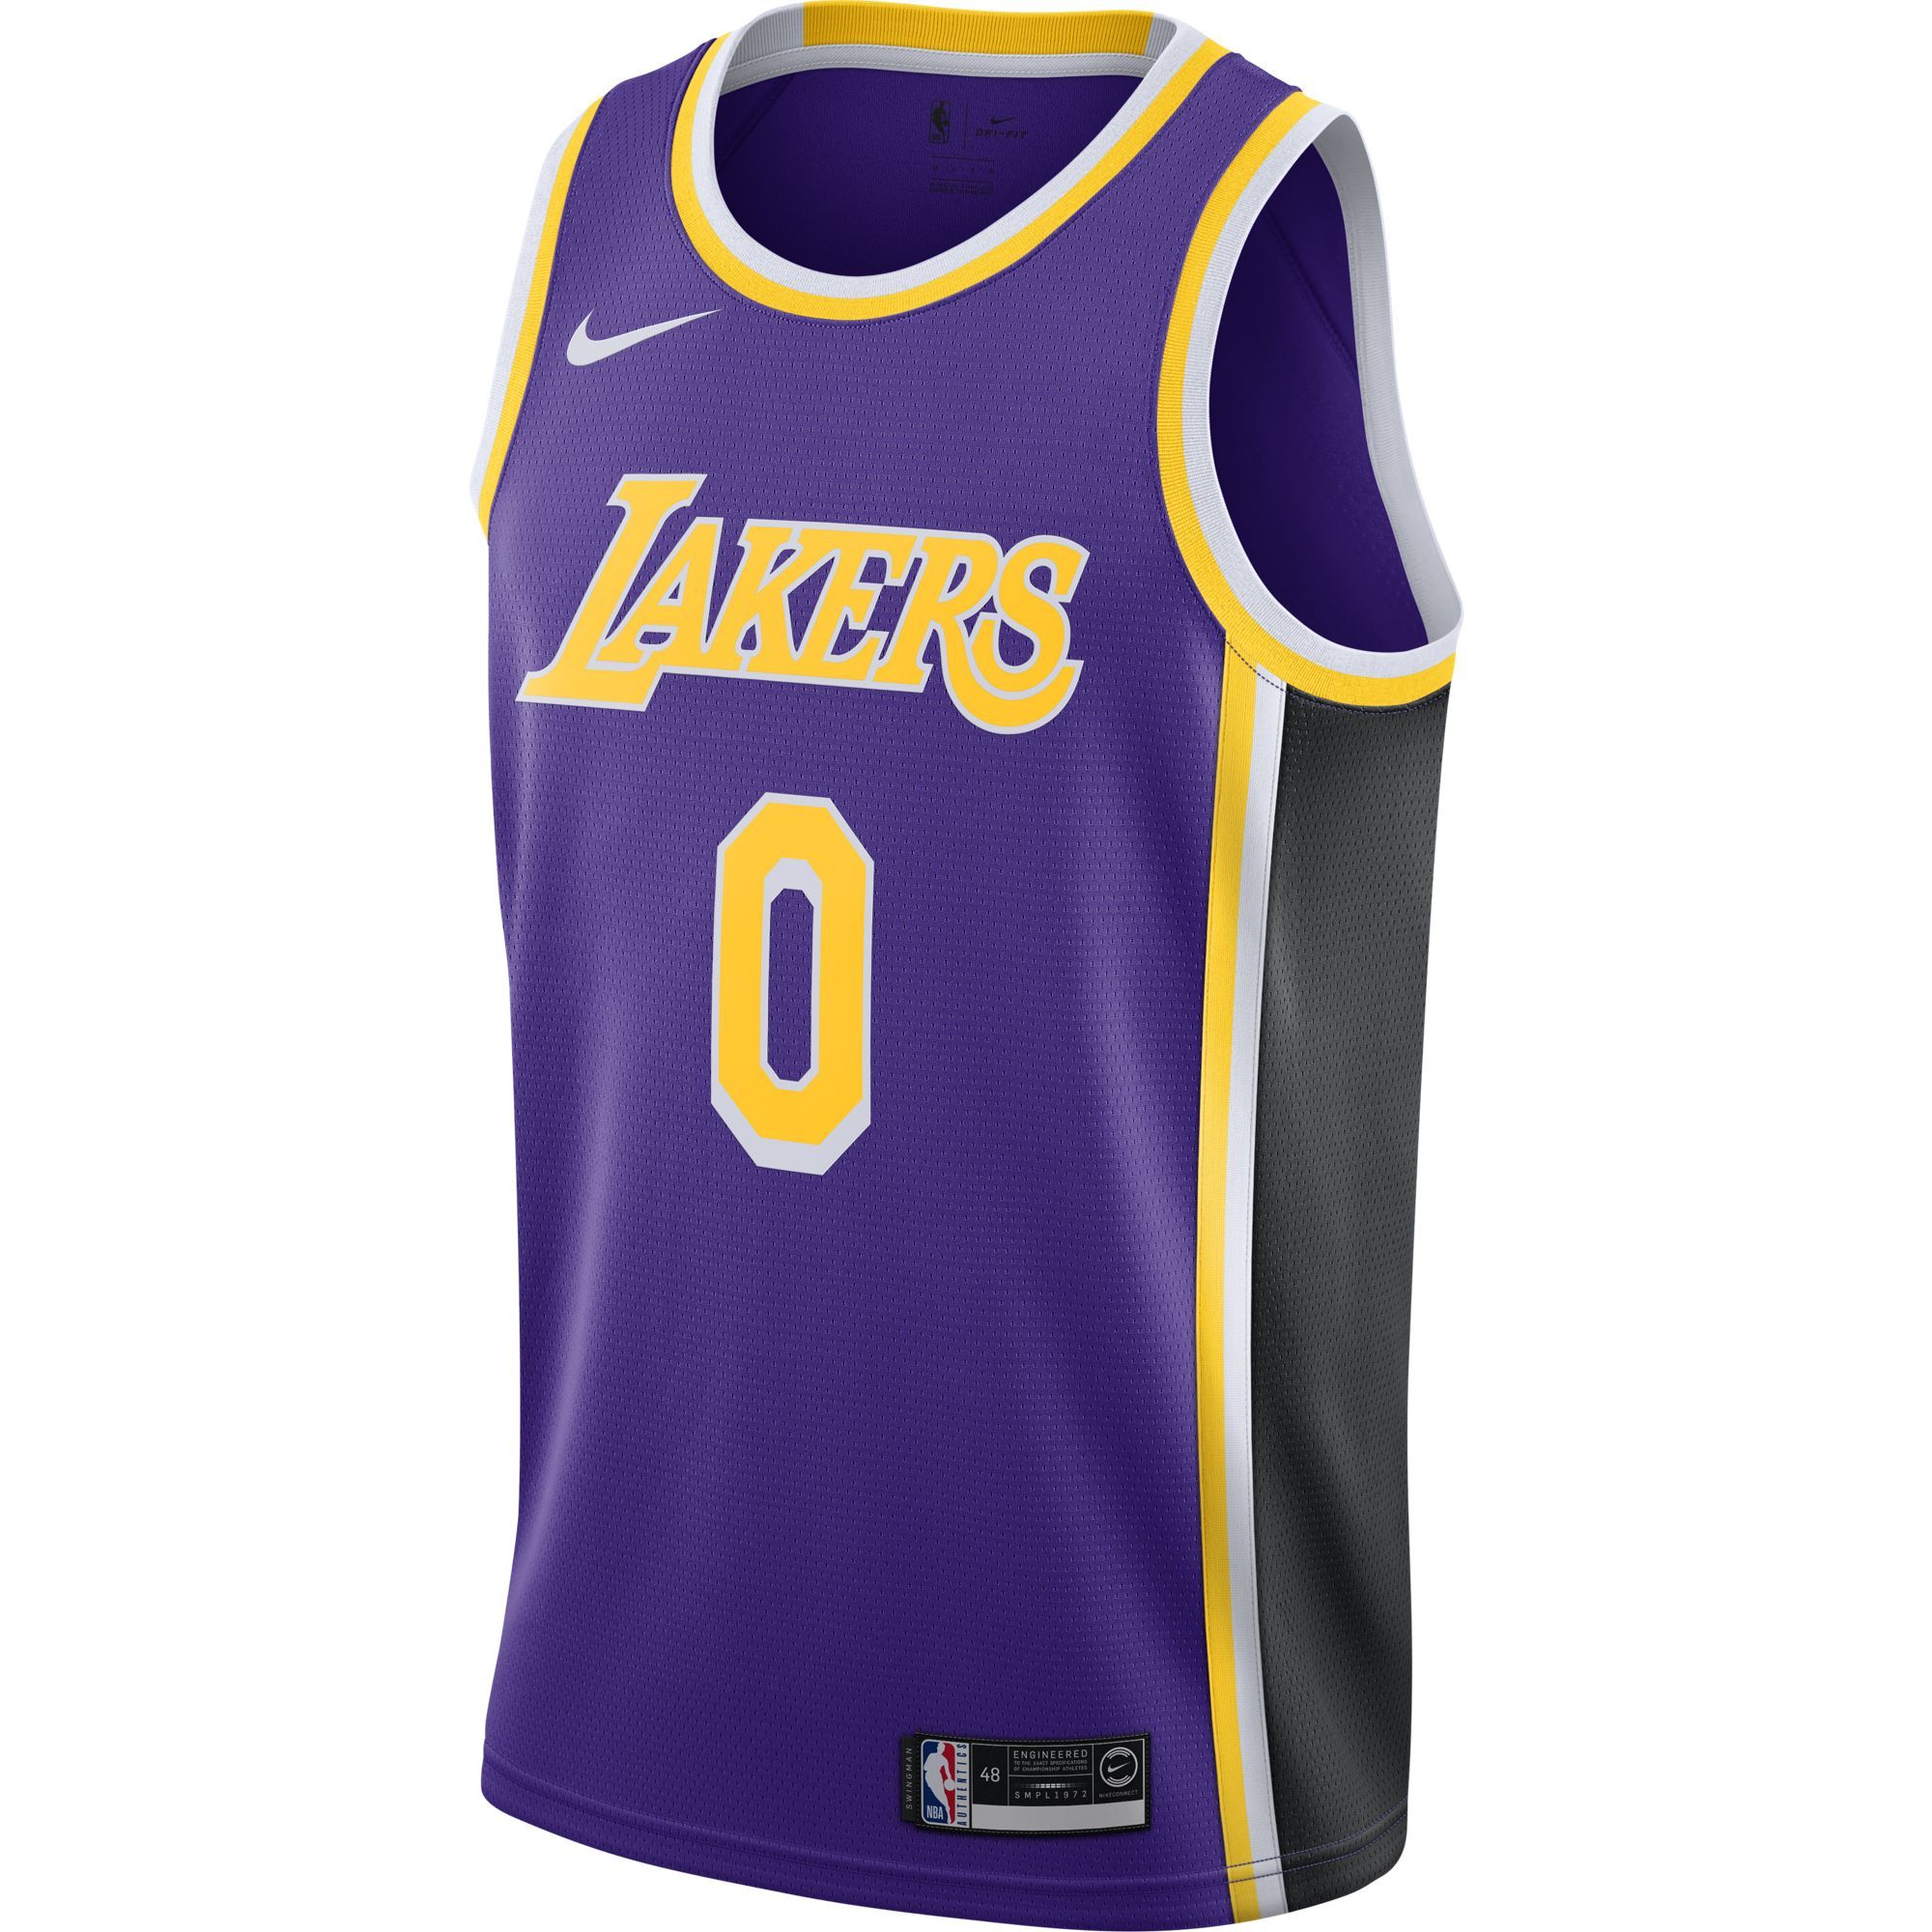 Black Lakers Jersey Kuzma Online Store, UP TO 50% OFF